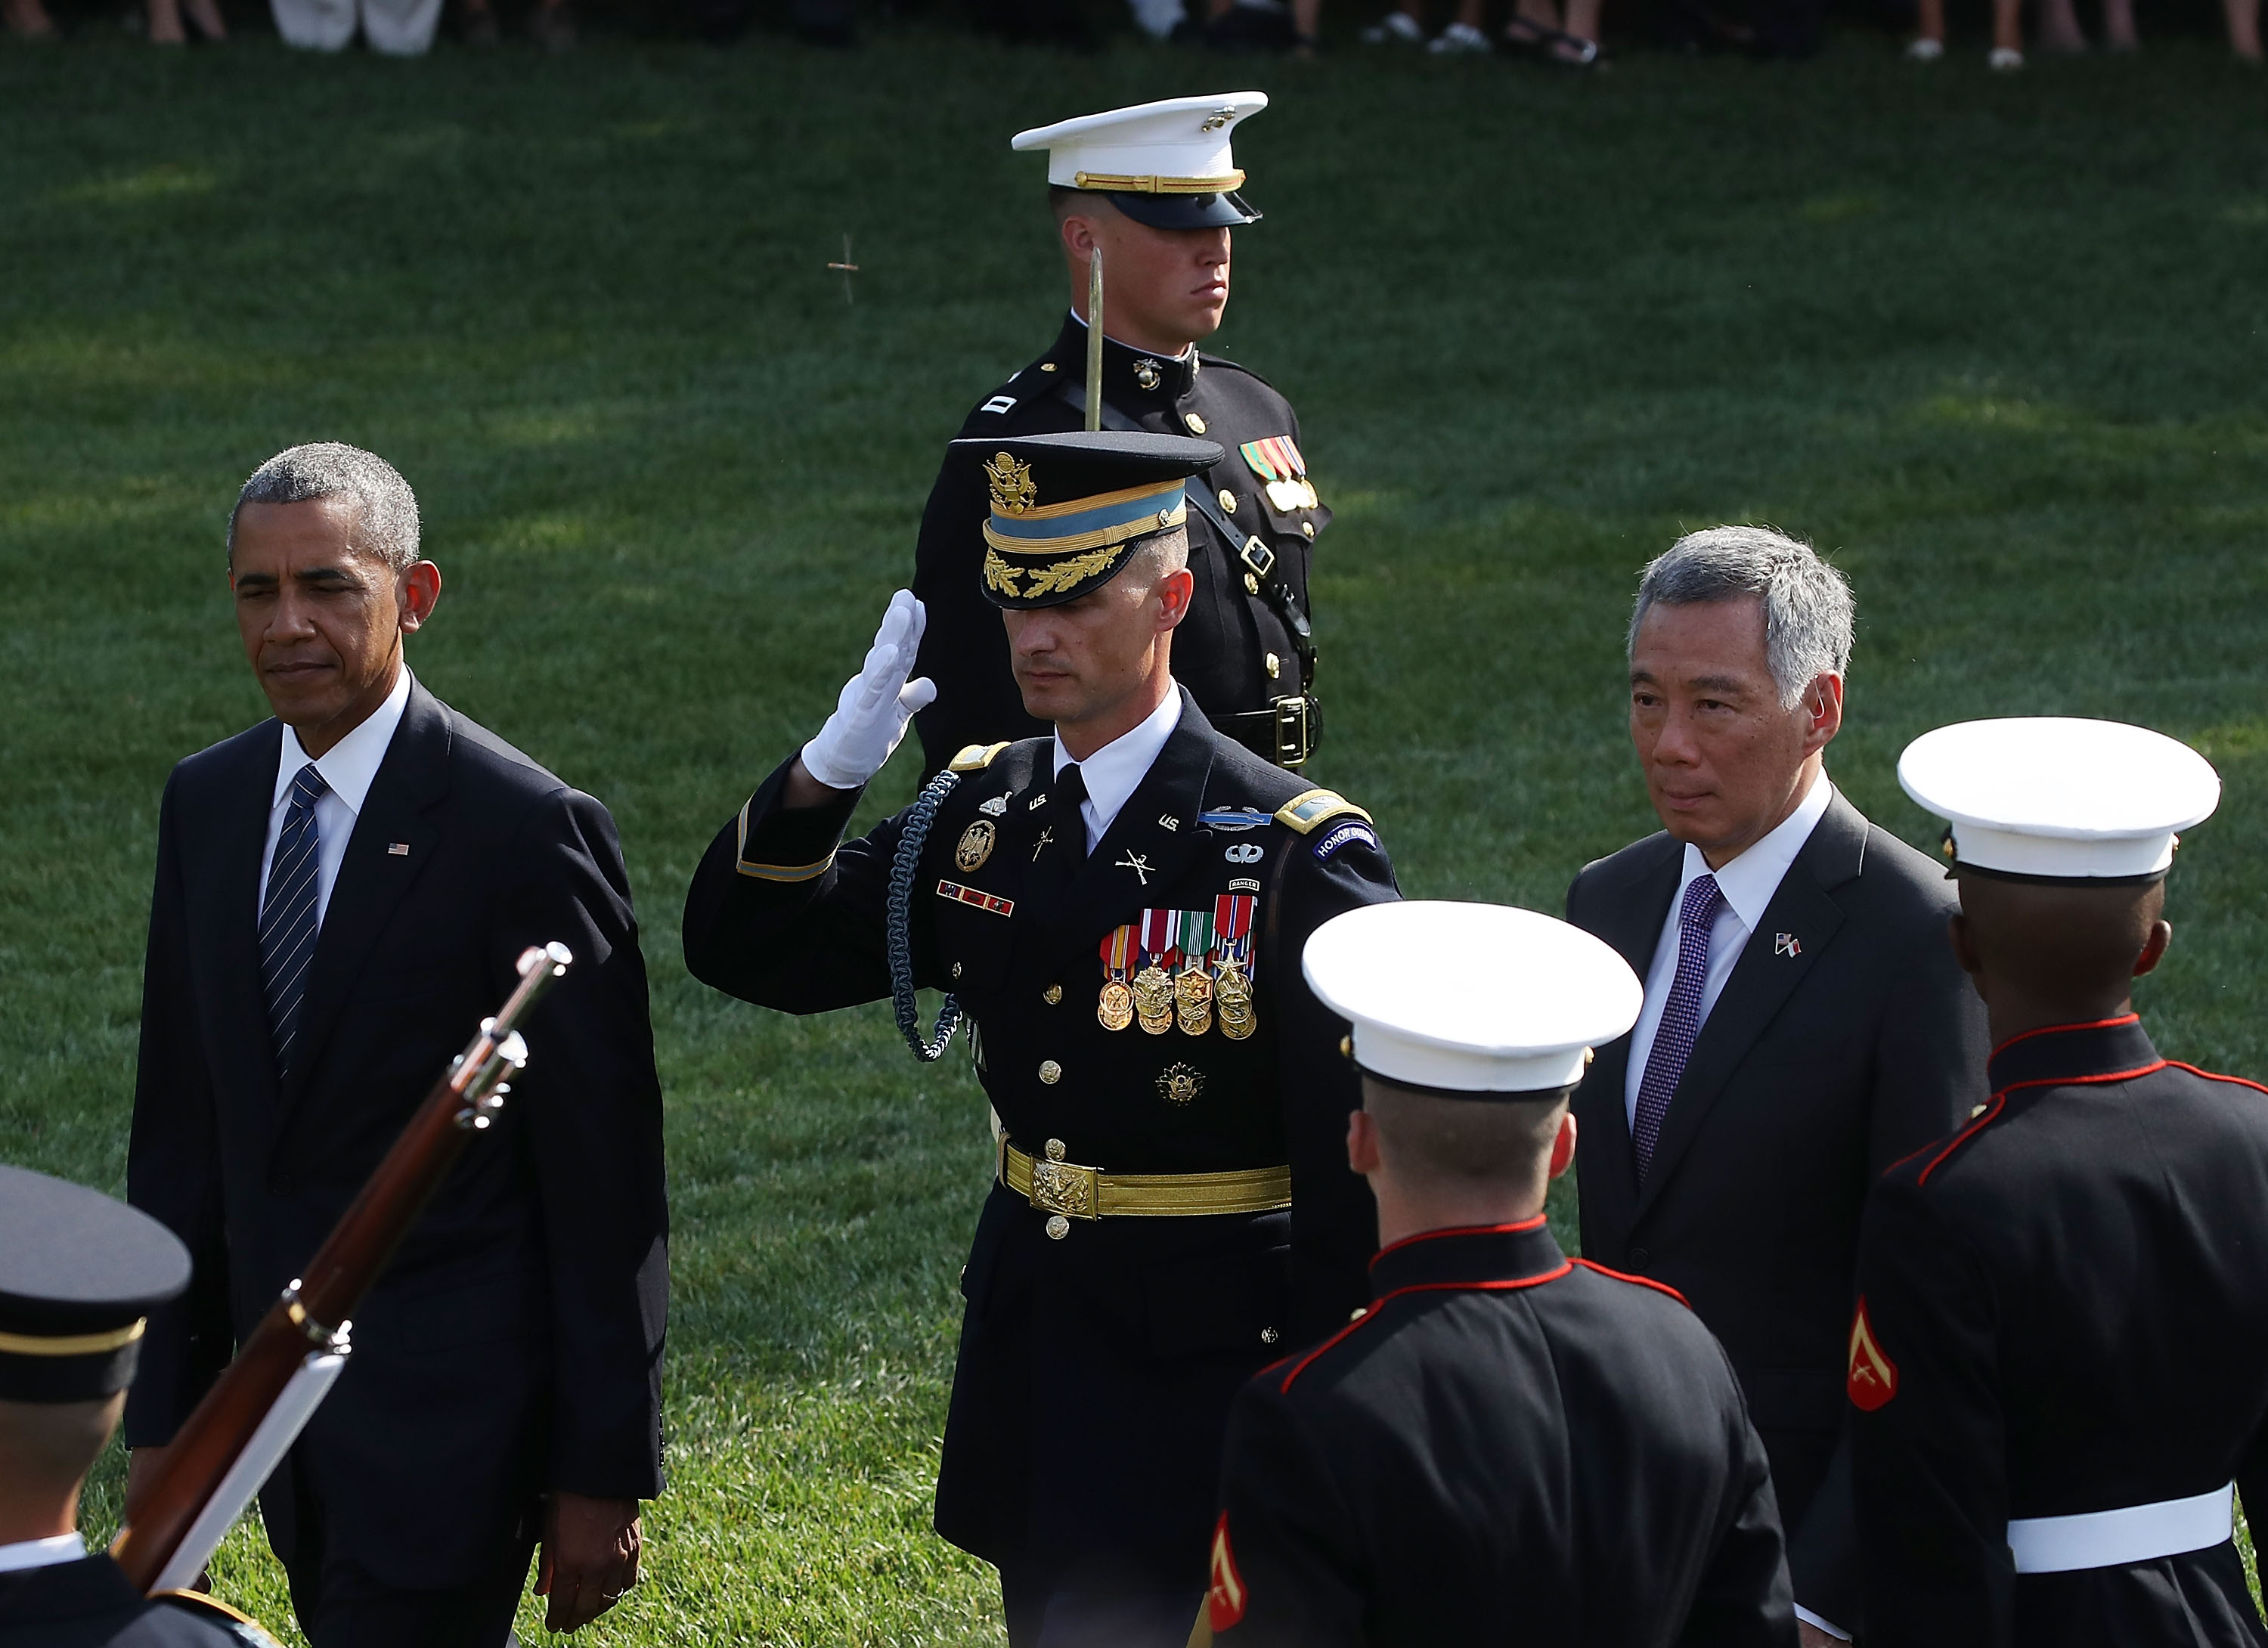 WASHINGTON, DC - AUGUST 02: U.S. President Barack Obama (L), and Singapore Prime Minister Lee Hsien Loong (R), inspect the troops during an arrival ceremony on the South Lawn of the White House August 2, 2016 in Washington, DC. The president and first lady will host a state dinner in Loong's honor, just the 11th state dinner thrown since Obama became president. (Photo by Mark Wilson/Getty Images)